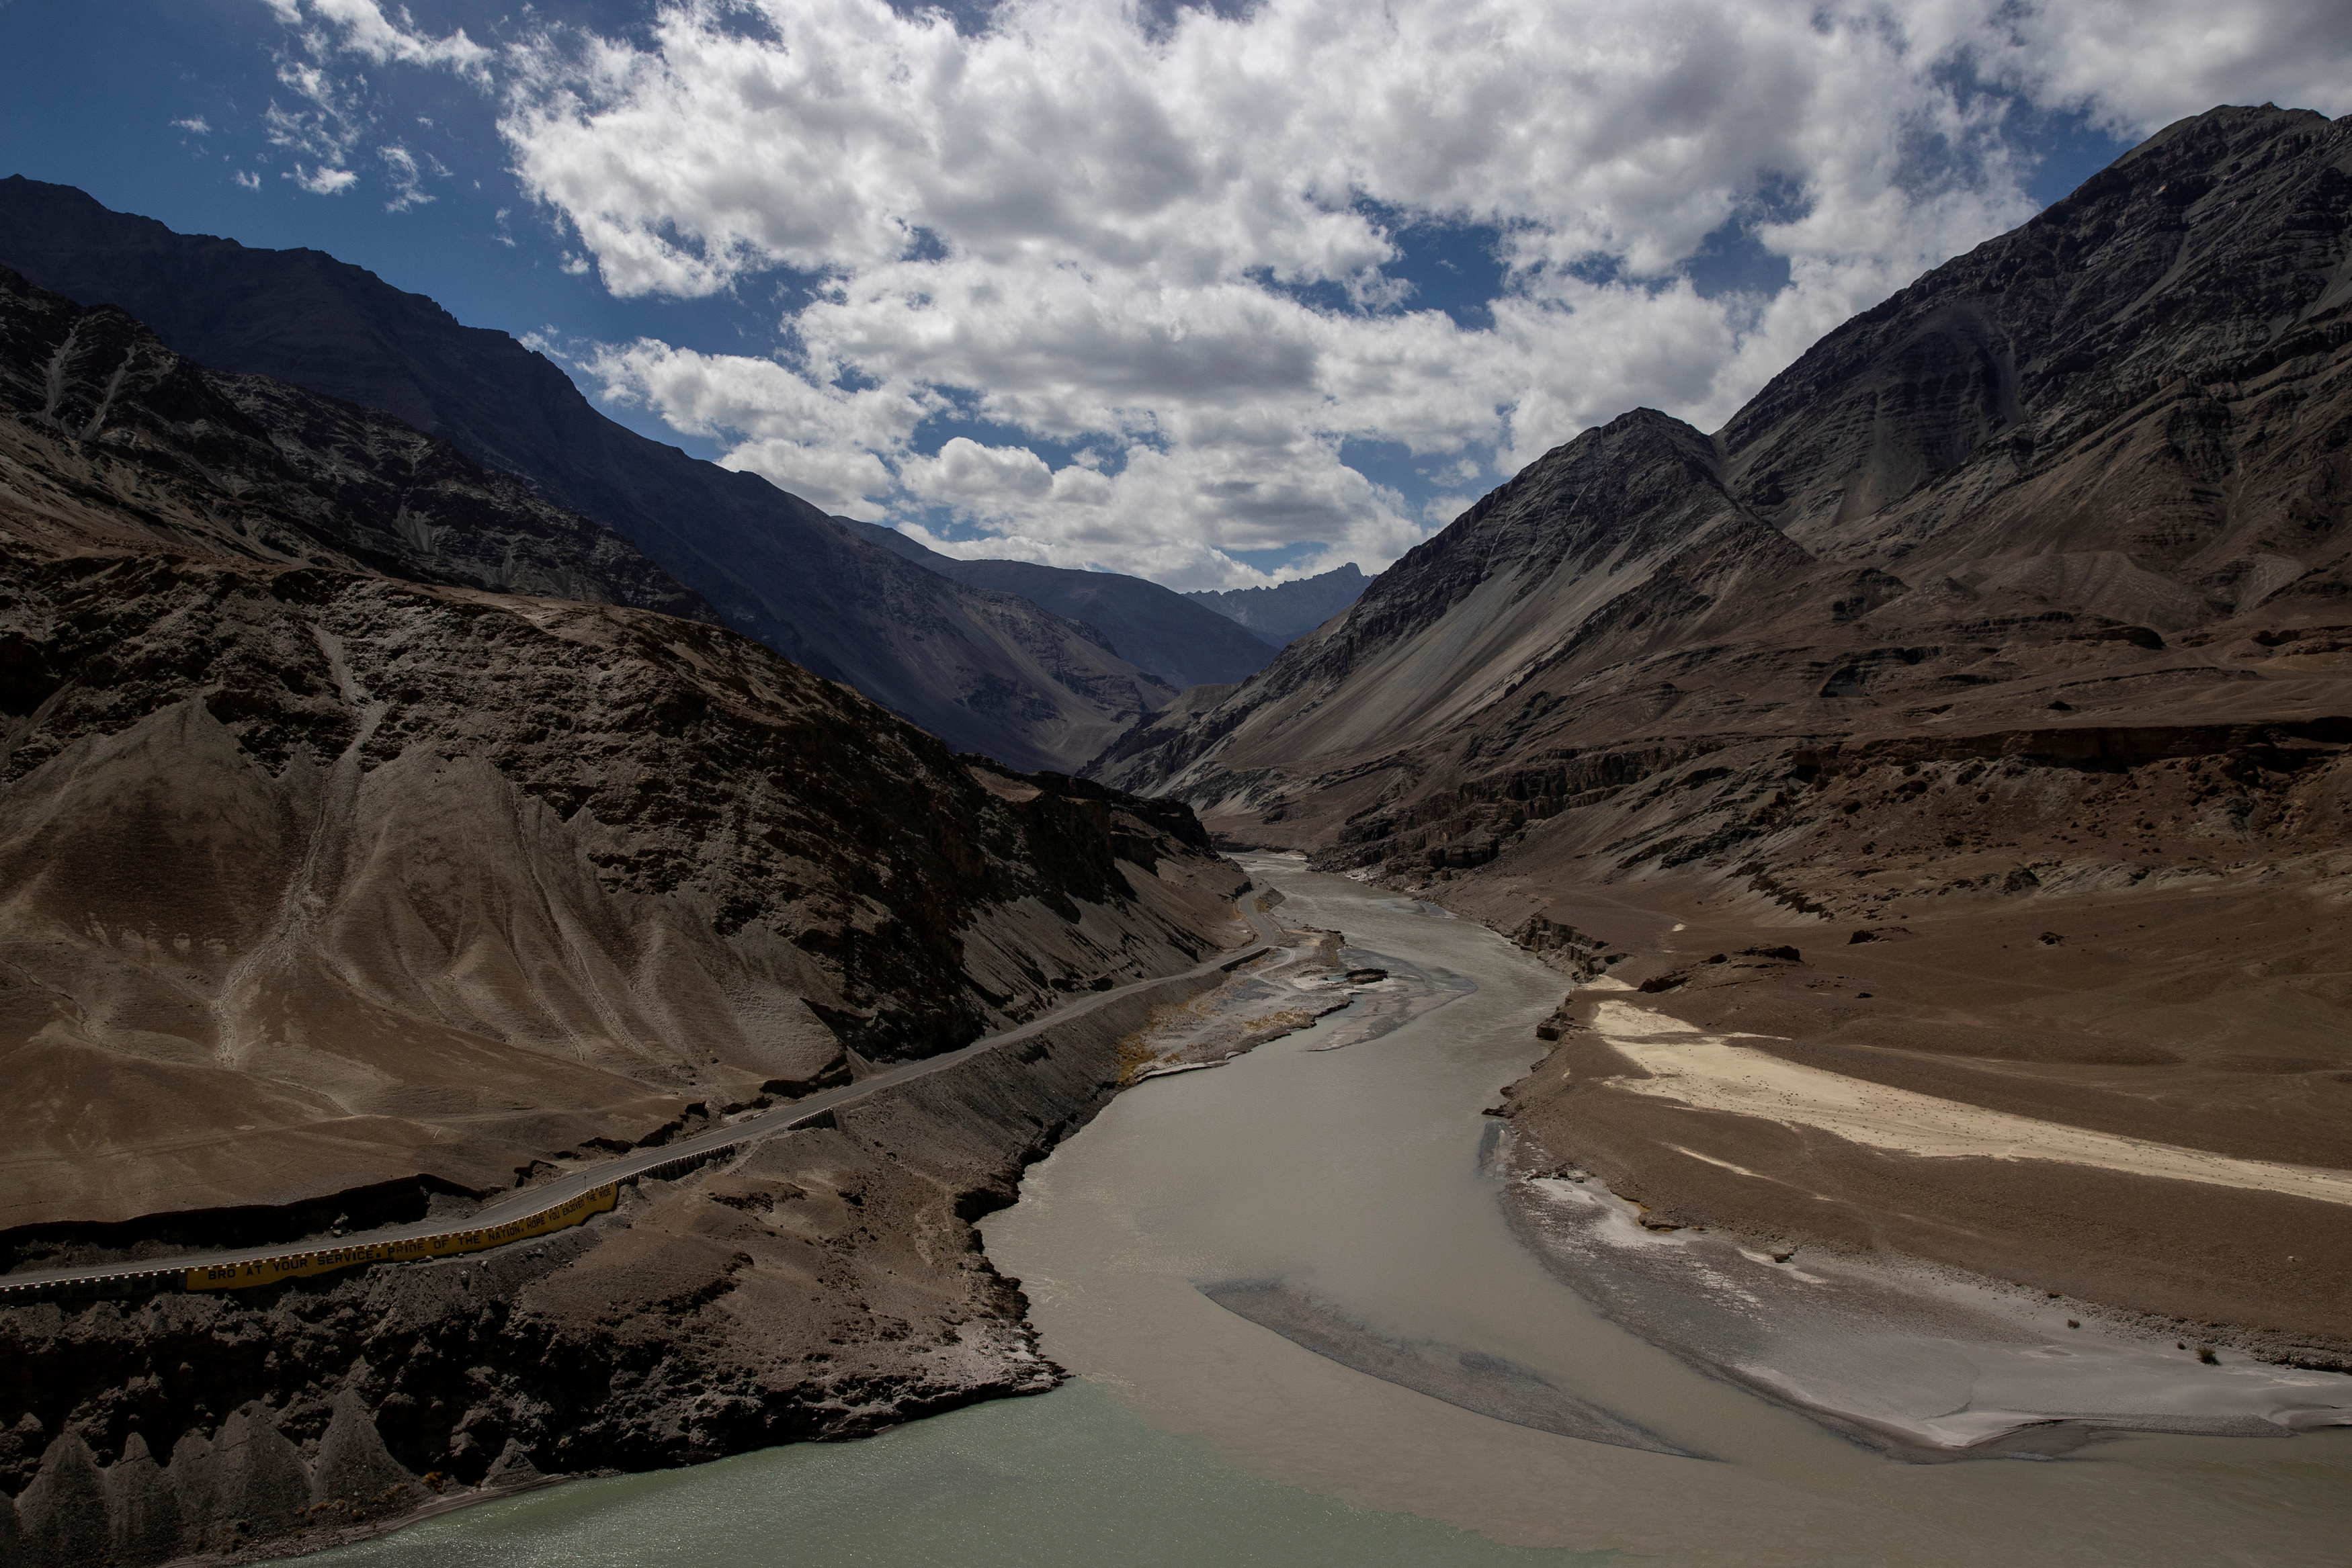 A highway getting constructed by Border Roads Organisation passes by the confluence of the Indus and Zanskhar rivers in the Ladakh region